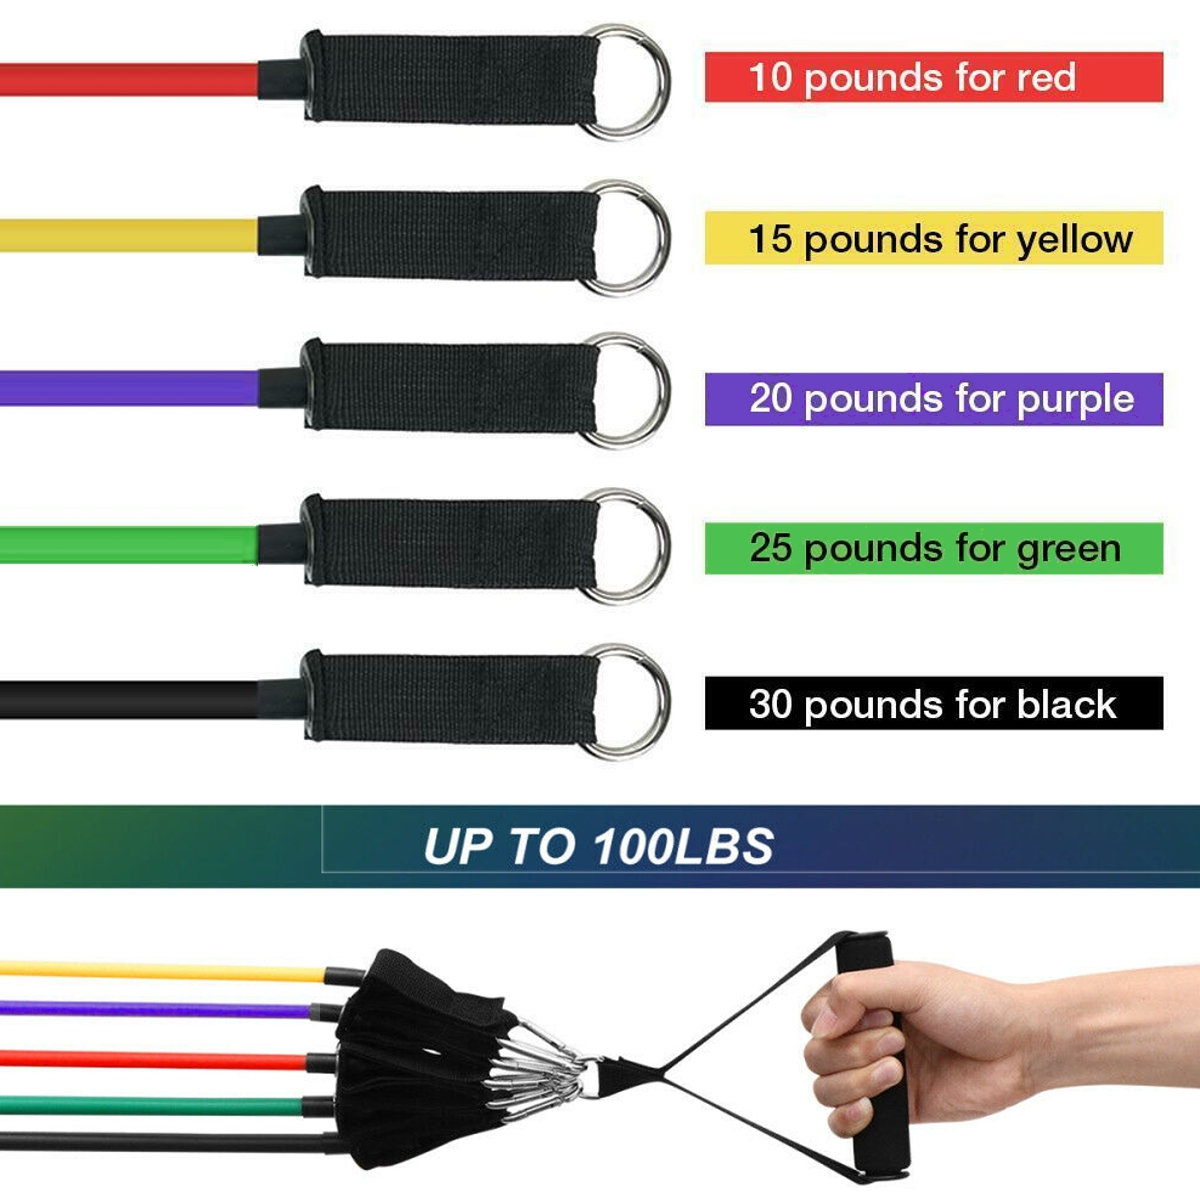 11Pcs Natural Rubber Latex Fitness Resistance Bands Exercise Elastic Pull String Work Exercise Yoga Training Set